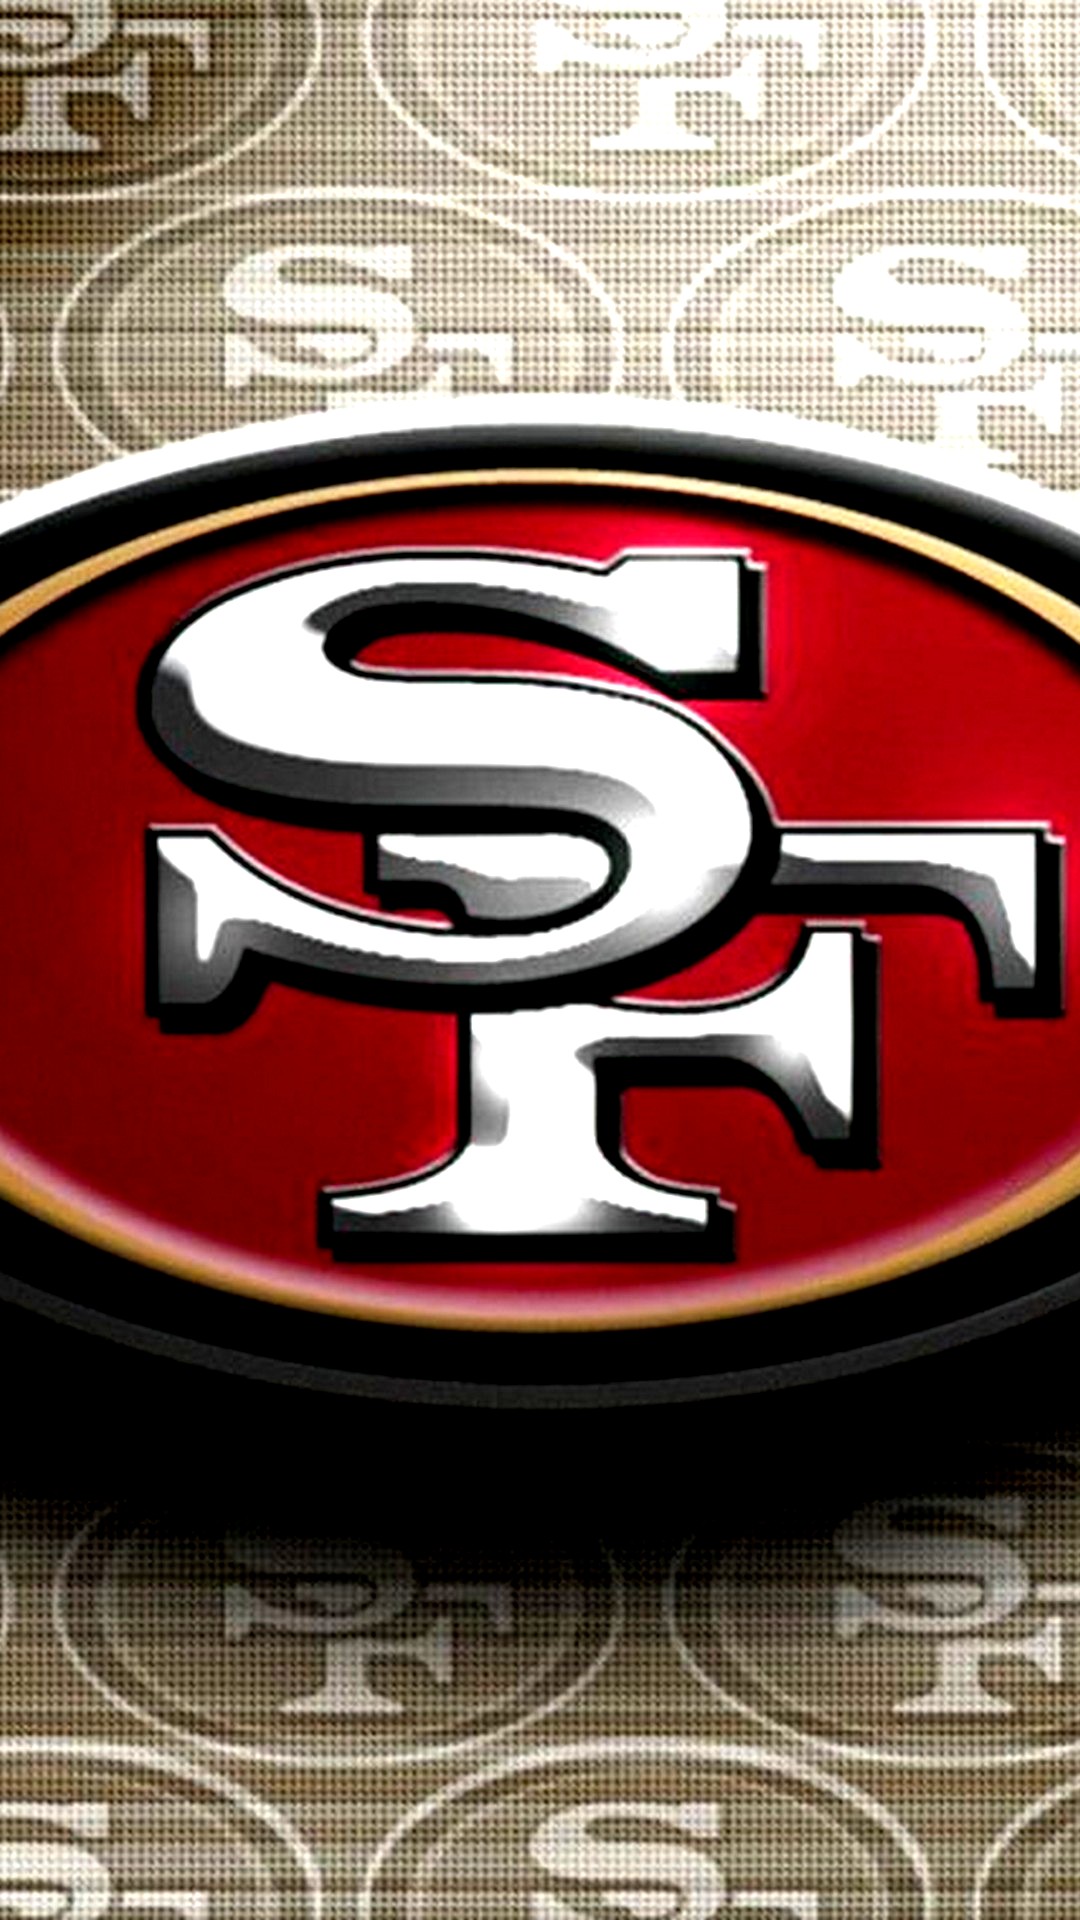 iPhone Wallpaper HD 49ers With high-resolution 1080X1920 pixel. You can use this wallpaper for your Mac or Windows Desktop Background, iPhone, Android or Tablet and another Smartphone device